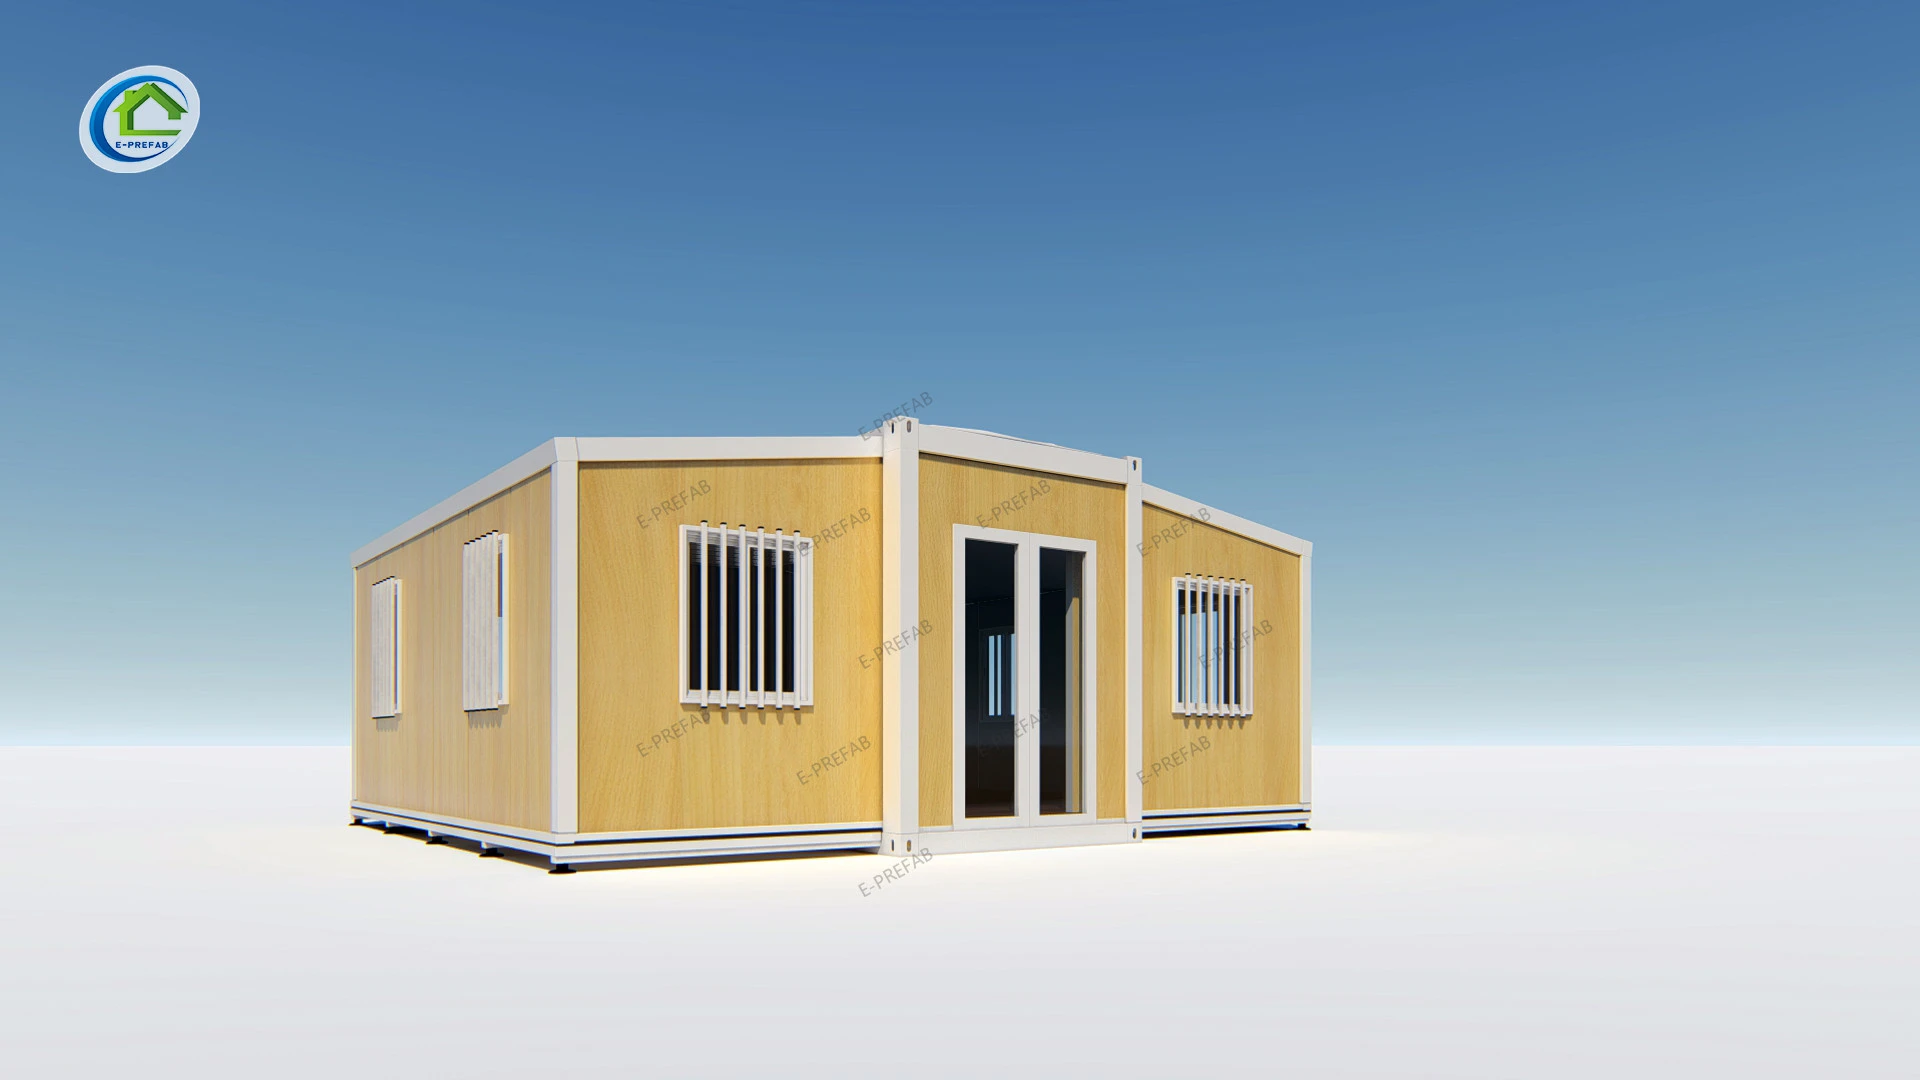 East 2021 hot selling 20 ft luxury model house prefab modular homes expandable container house